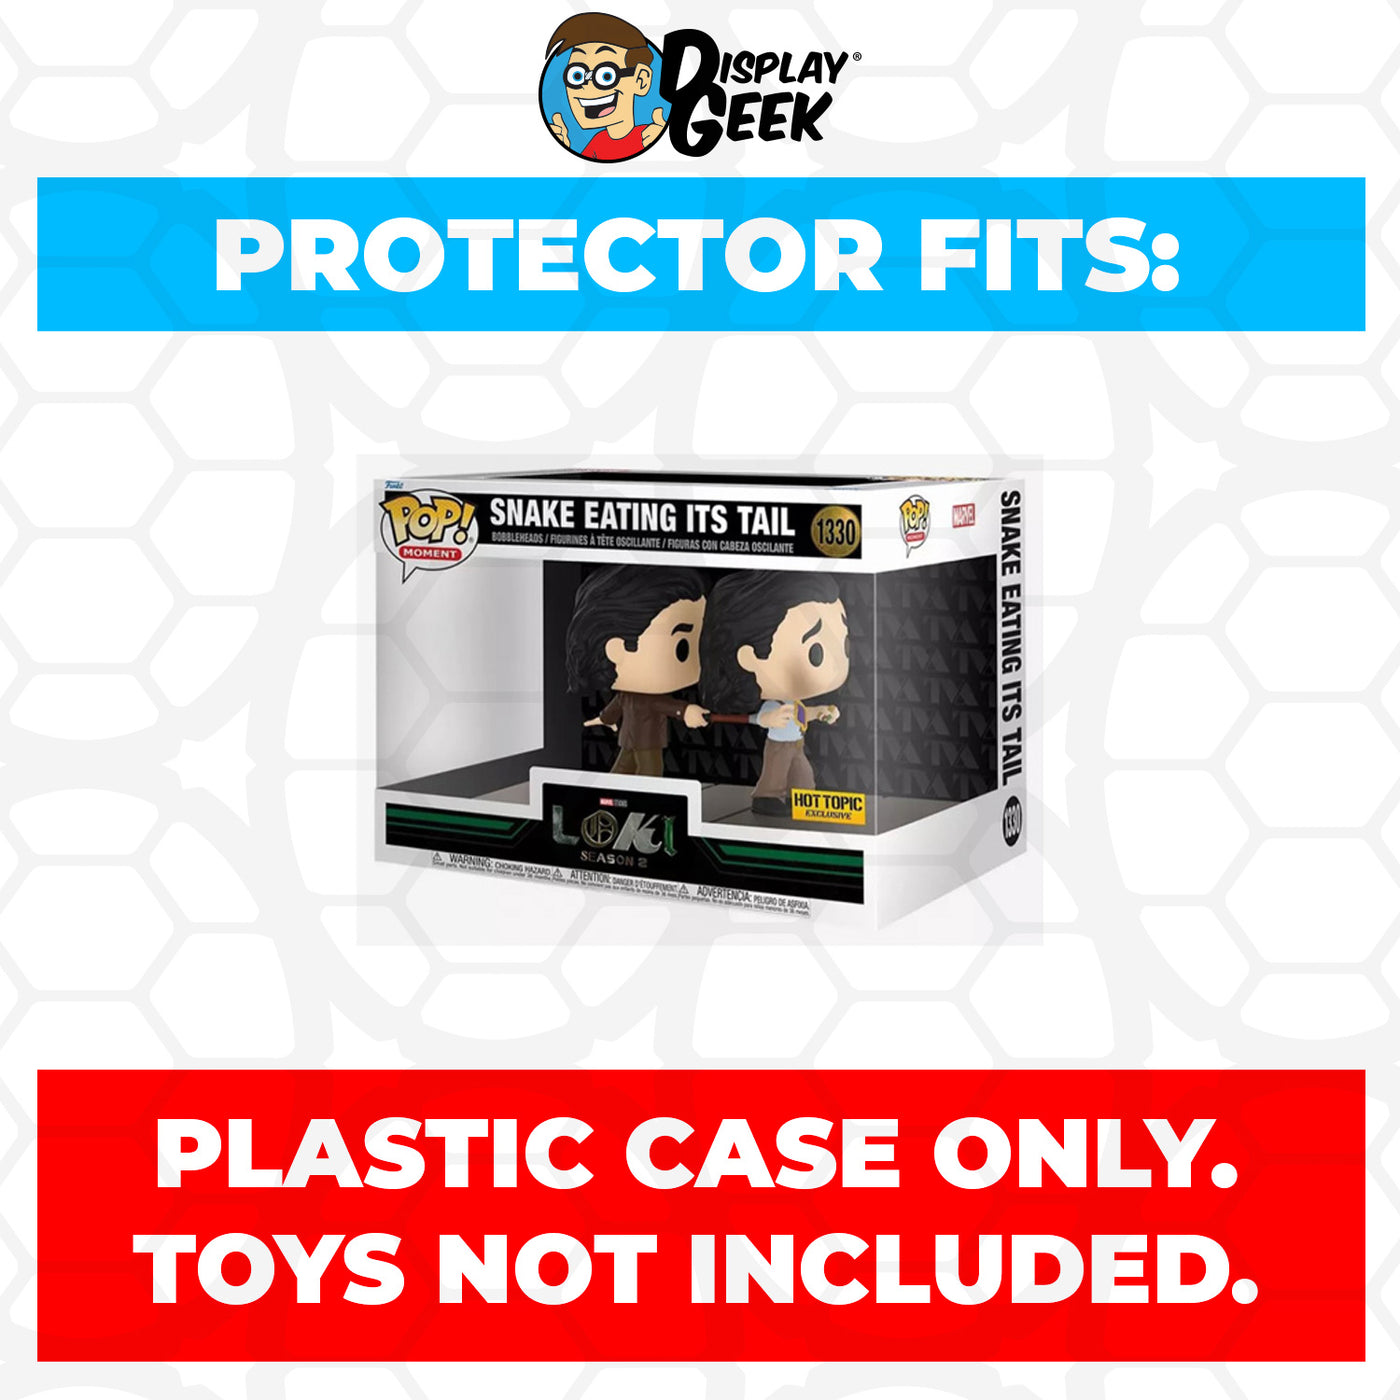 Pop Protector for Snake Eating Its Tail #1330 Funko Pop Moment on The Protector Guide App by Display Geek